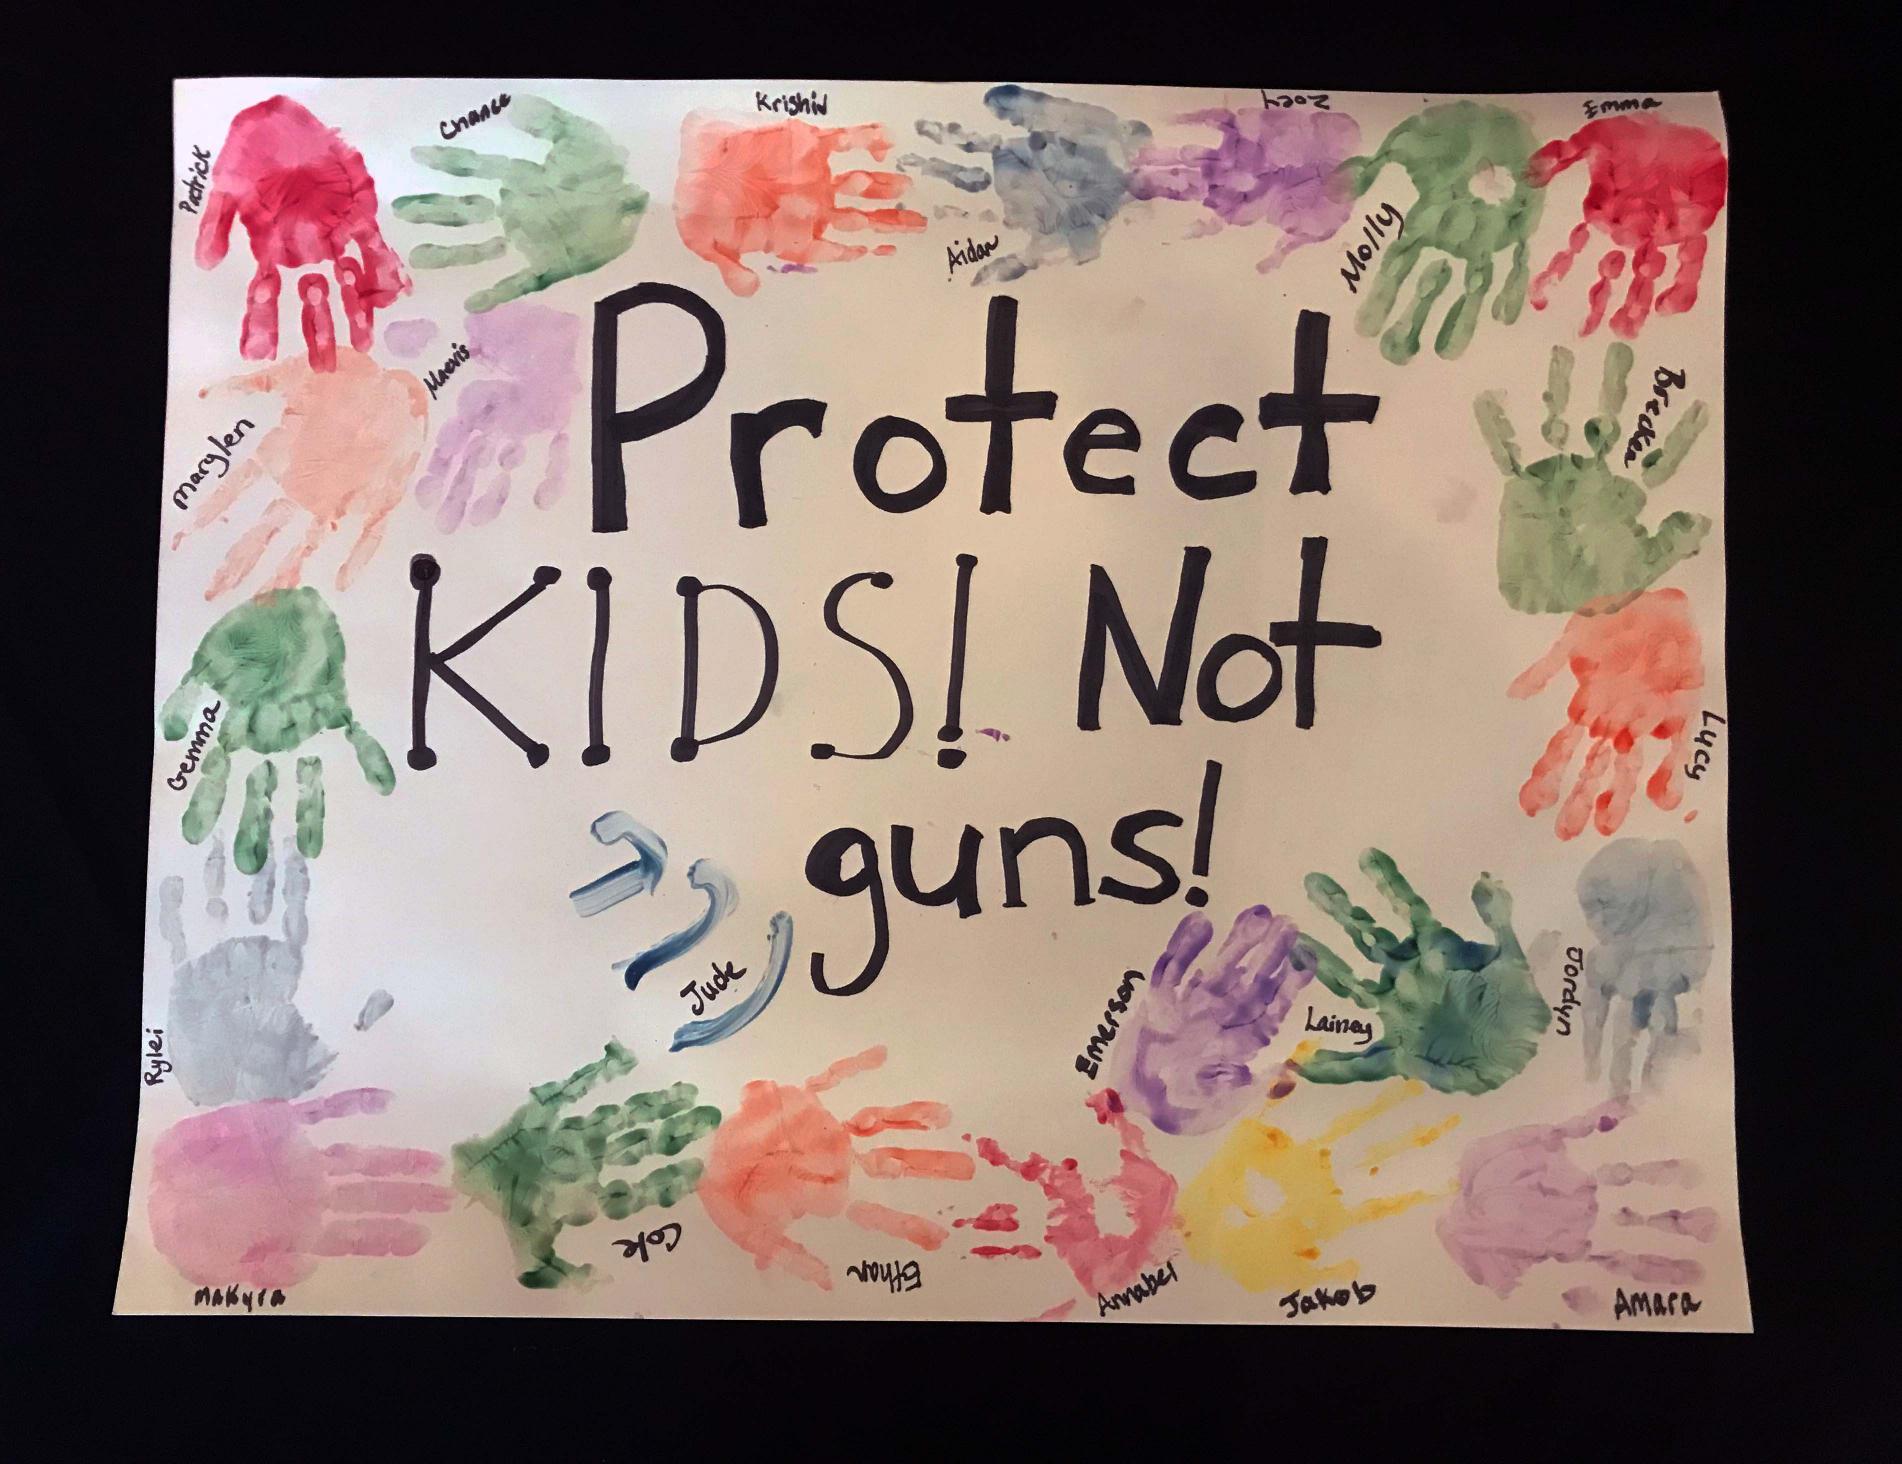 Charlotte March for Our Lives, 2018. Sign reads: "Protect kids! Not guns!"